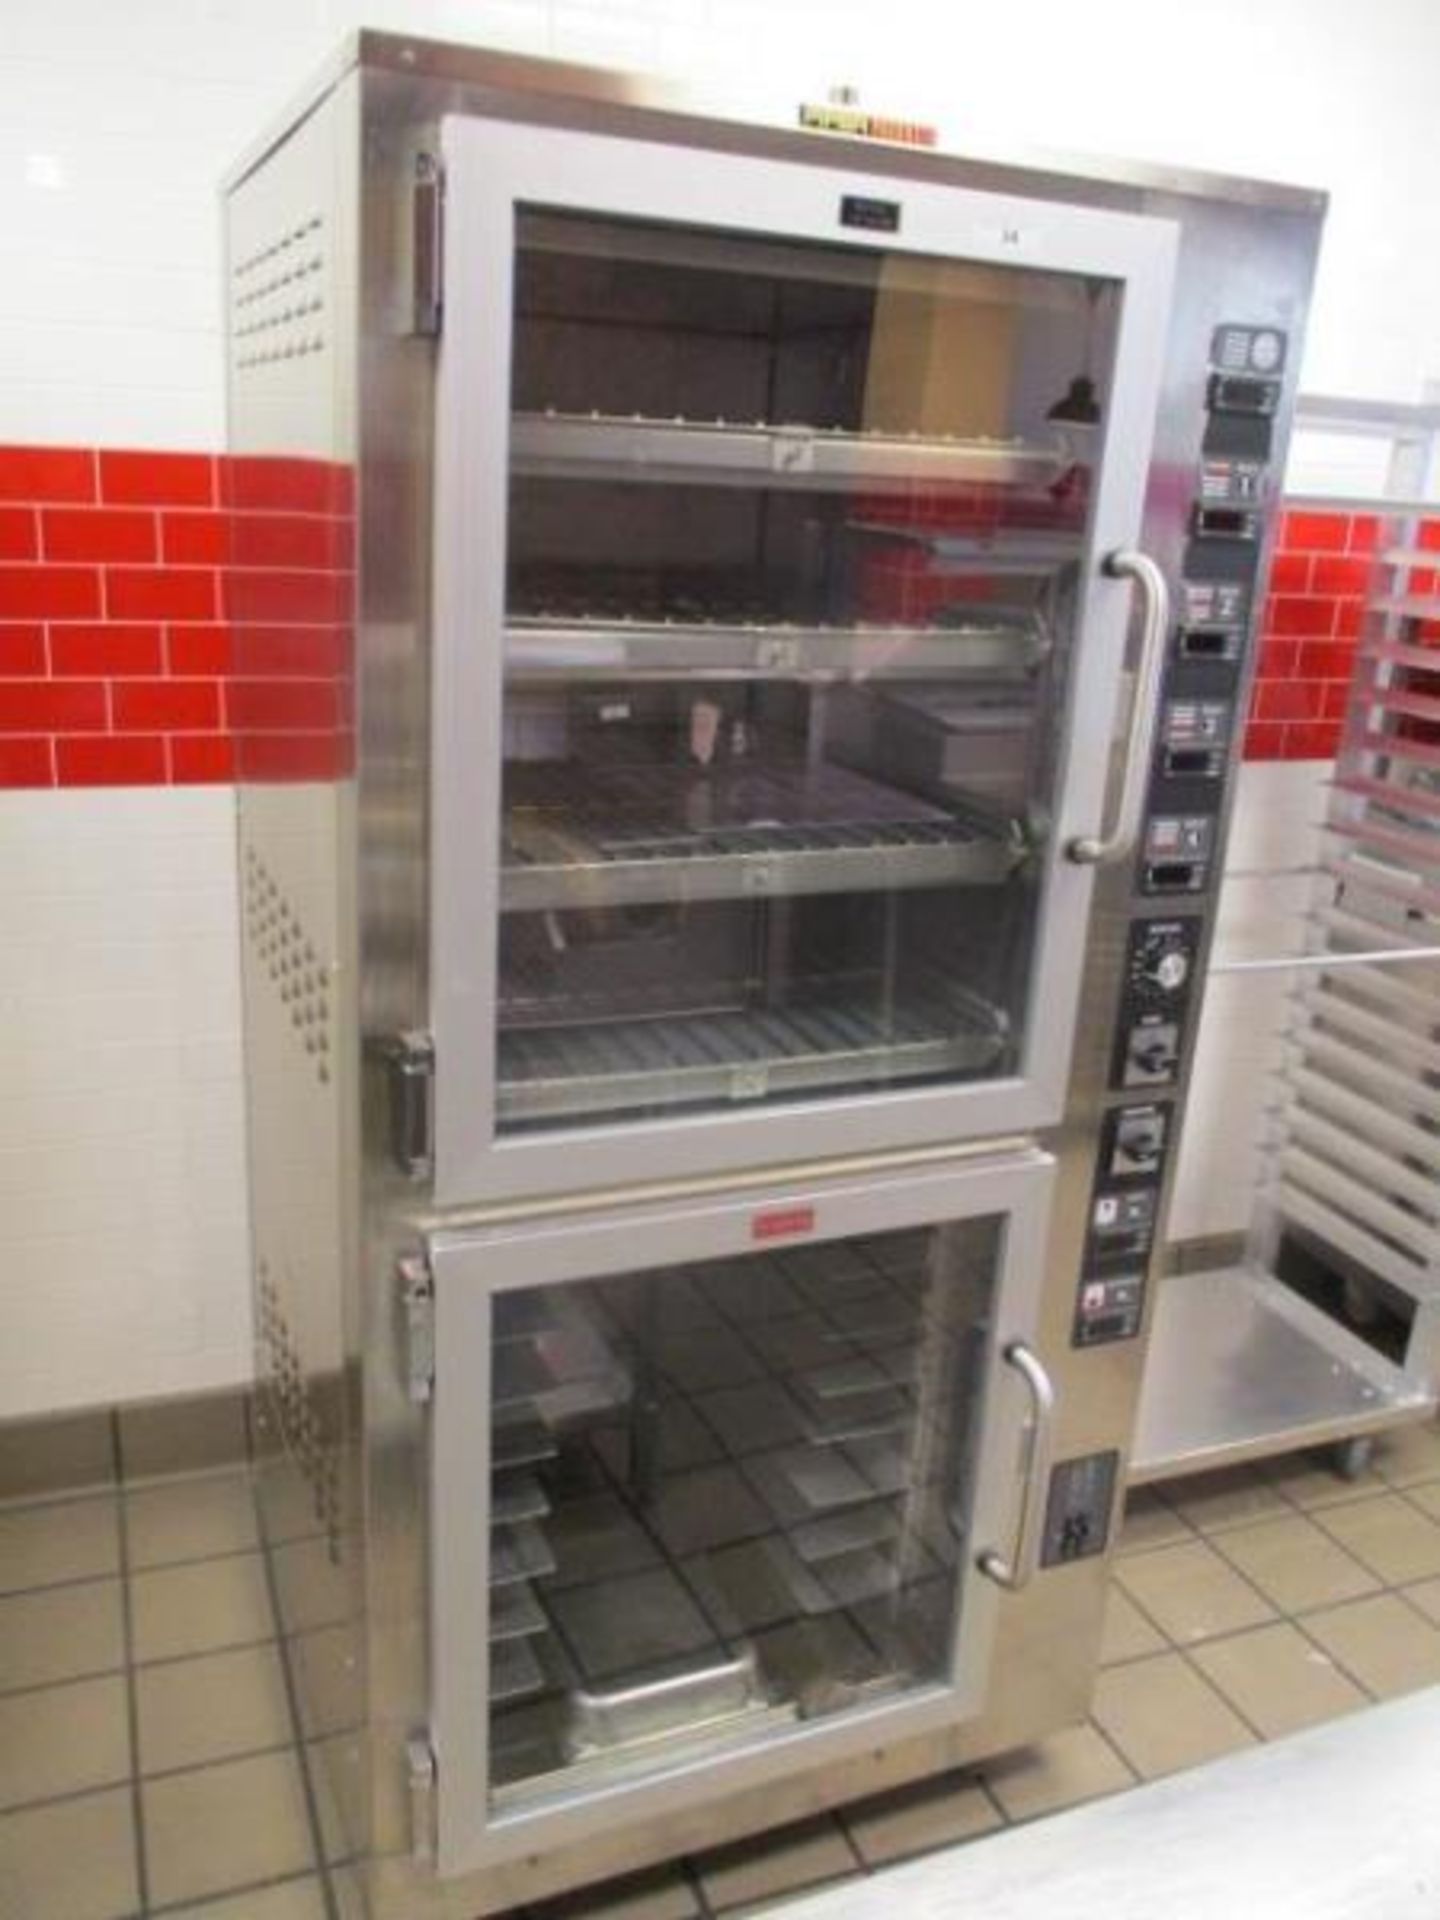 Piper Products Proofer/Oven Model Op-4-JJ-D, Serial # 42530, 120/208 volts, 3 phase, Made 6/9/2016